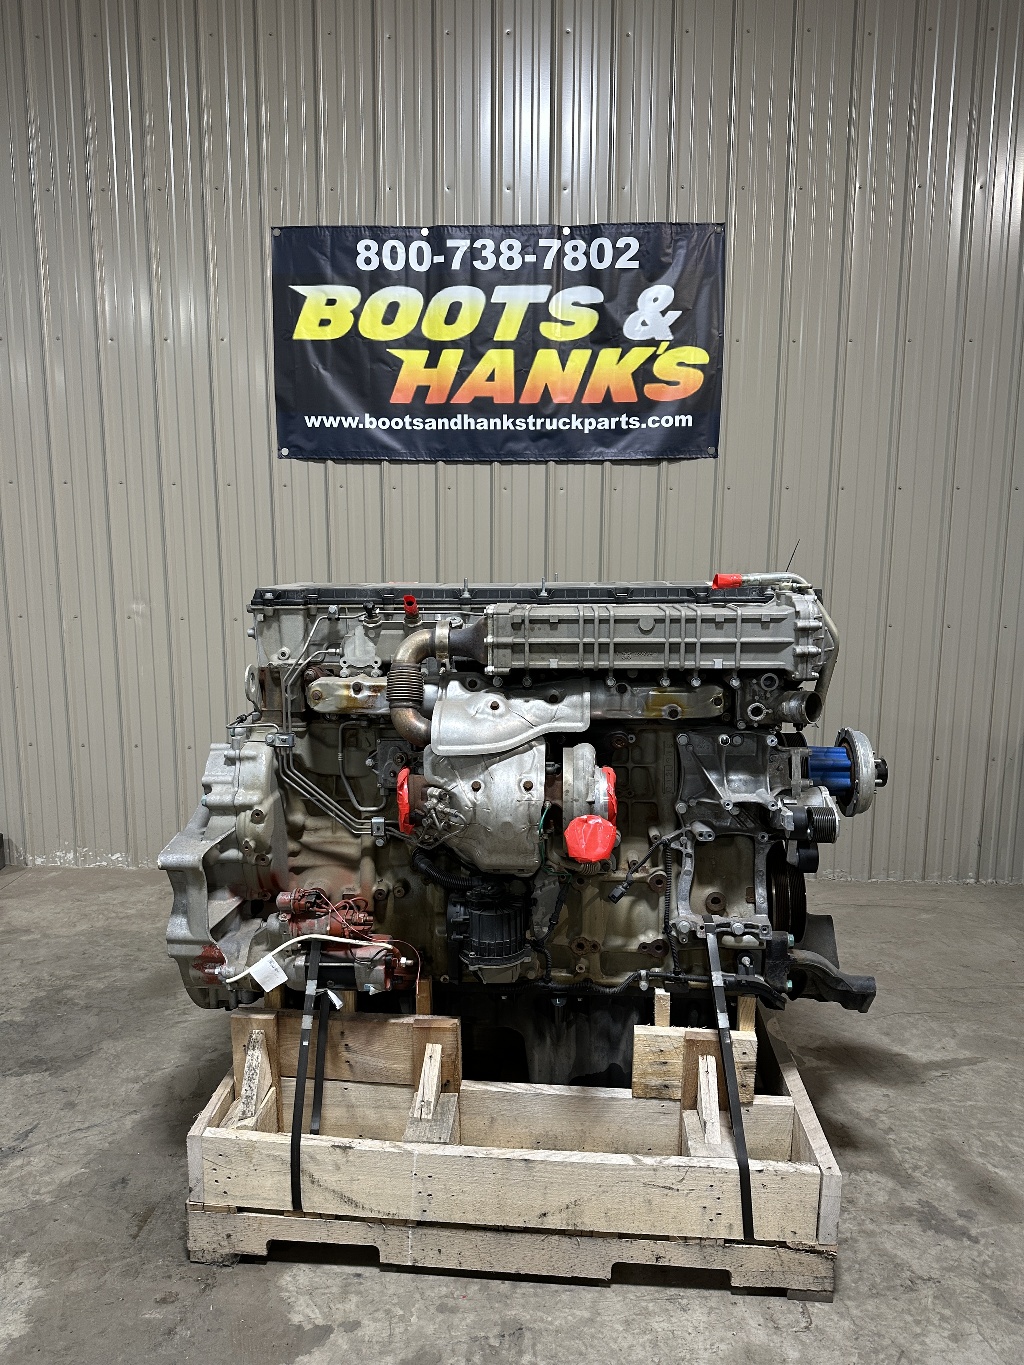 USED 2016 DETROIT DD13 COMPLETE ENGINE TRUCK PARTS #1968